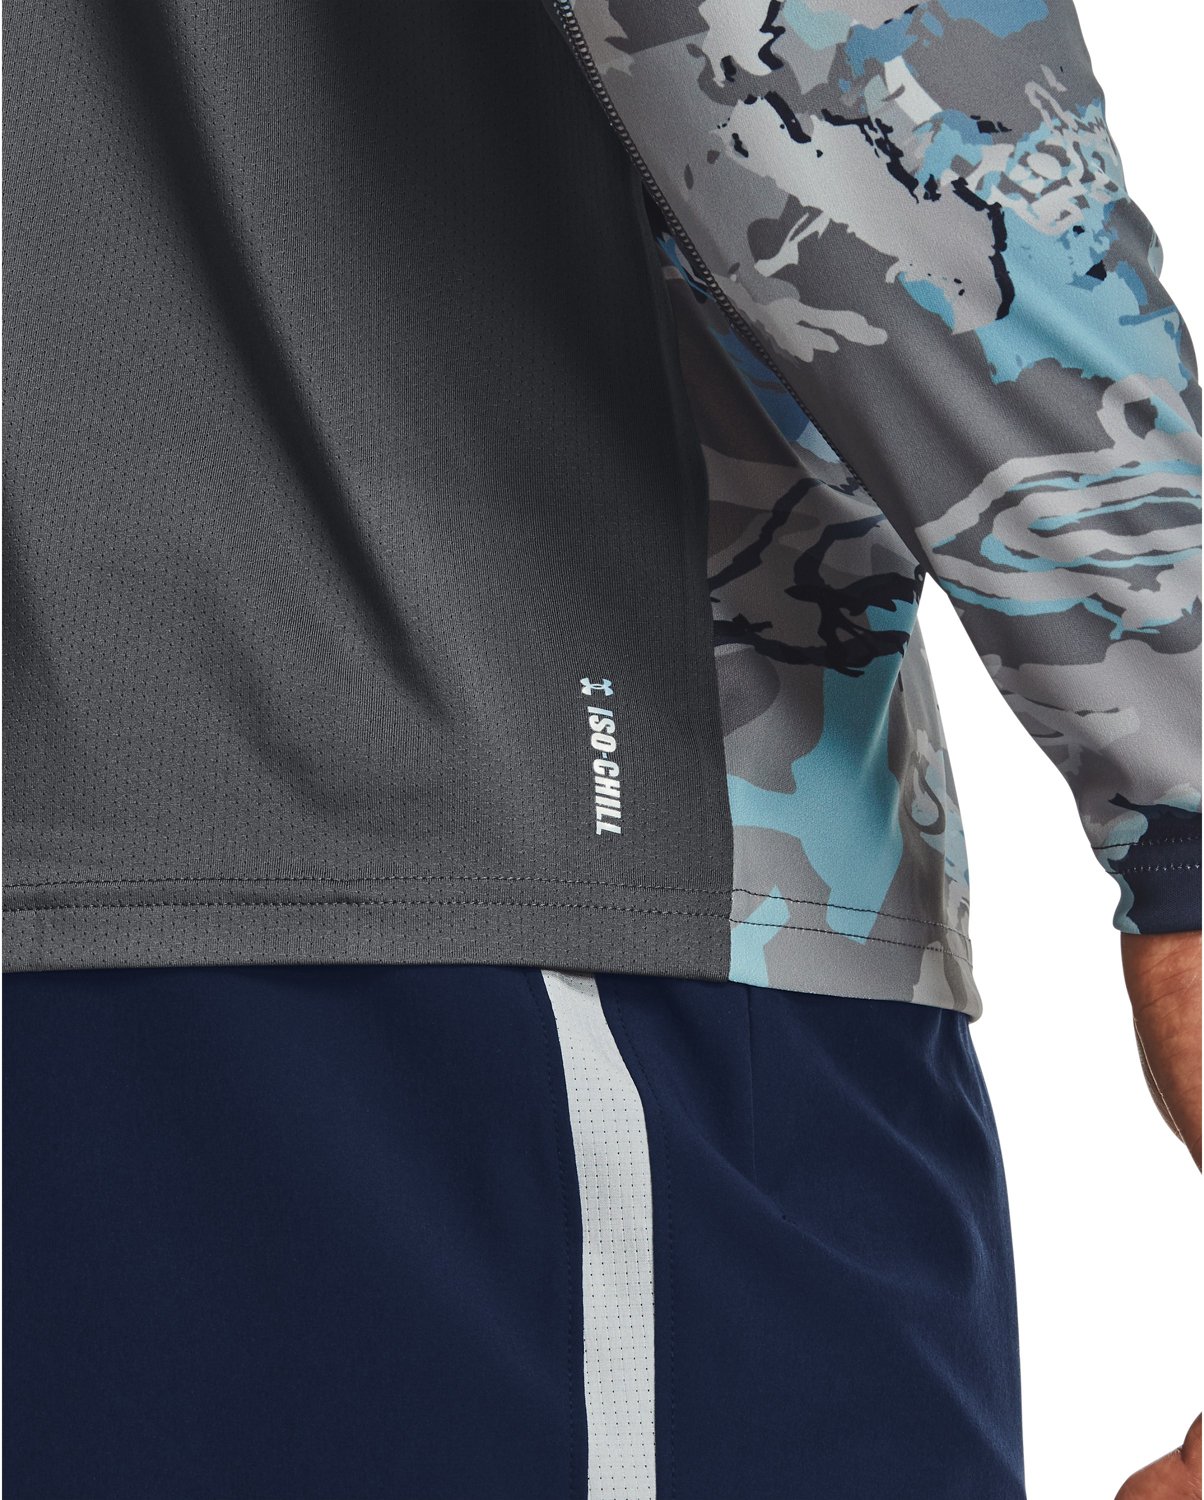 Academy Sports + Outdoors Under Armour Men's Iso-Chill Shore Break